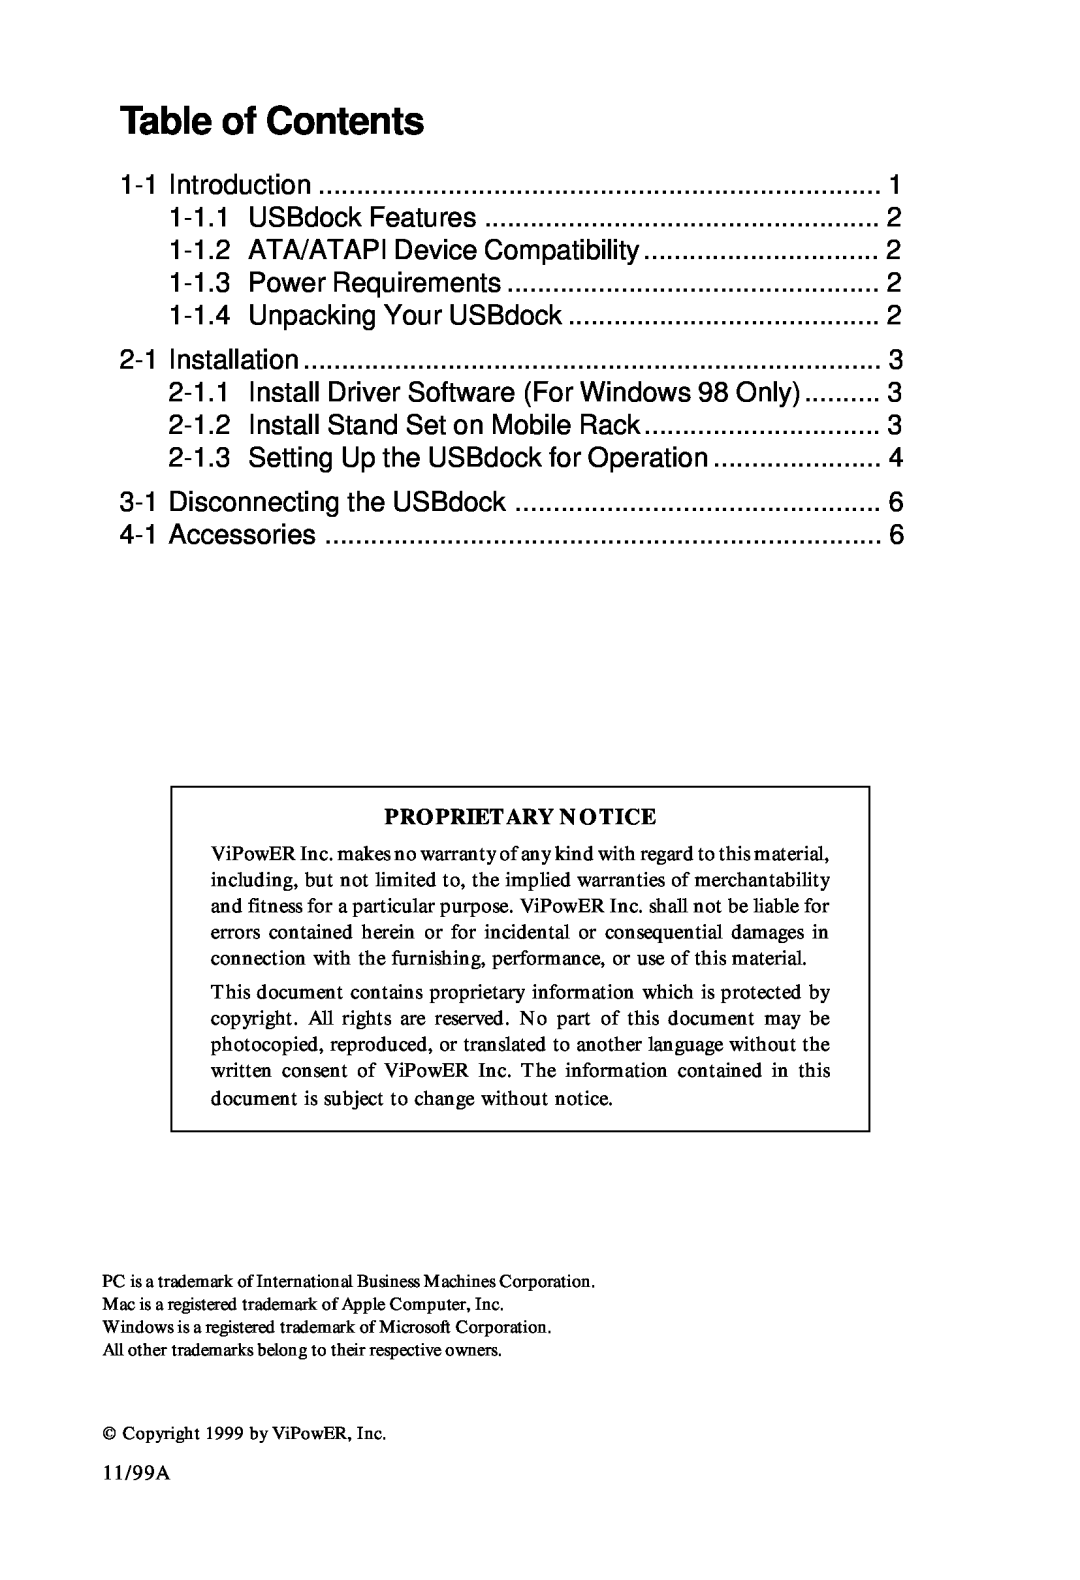 VIPowER VP-8058L installation manual Table of Contents 